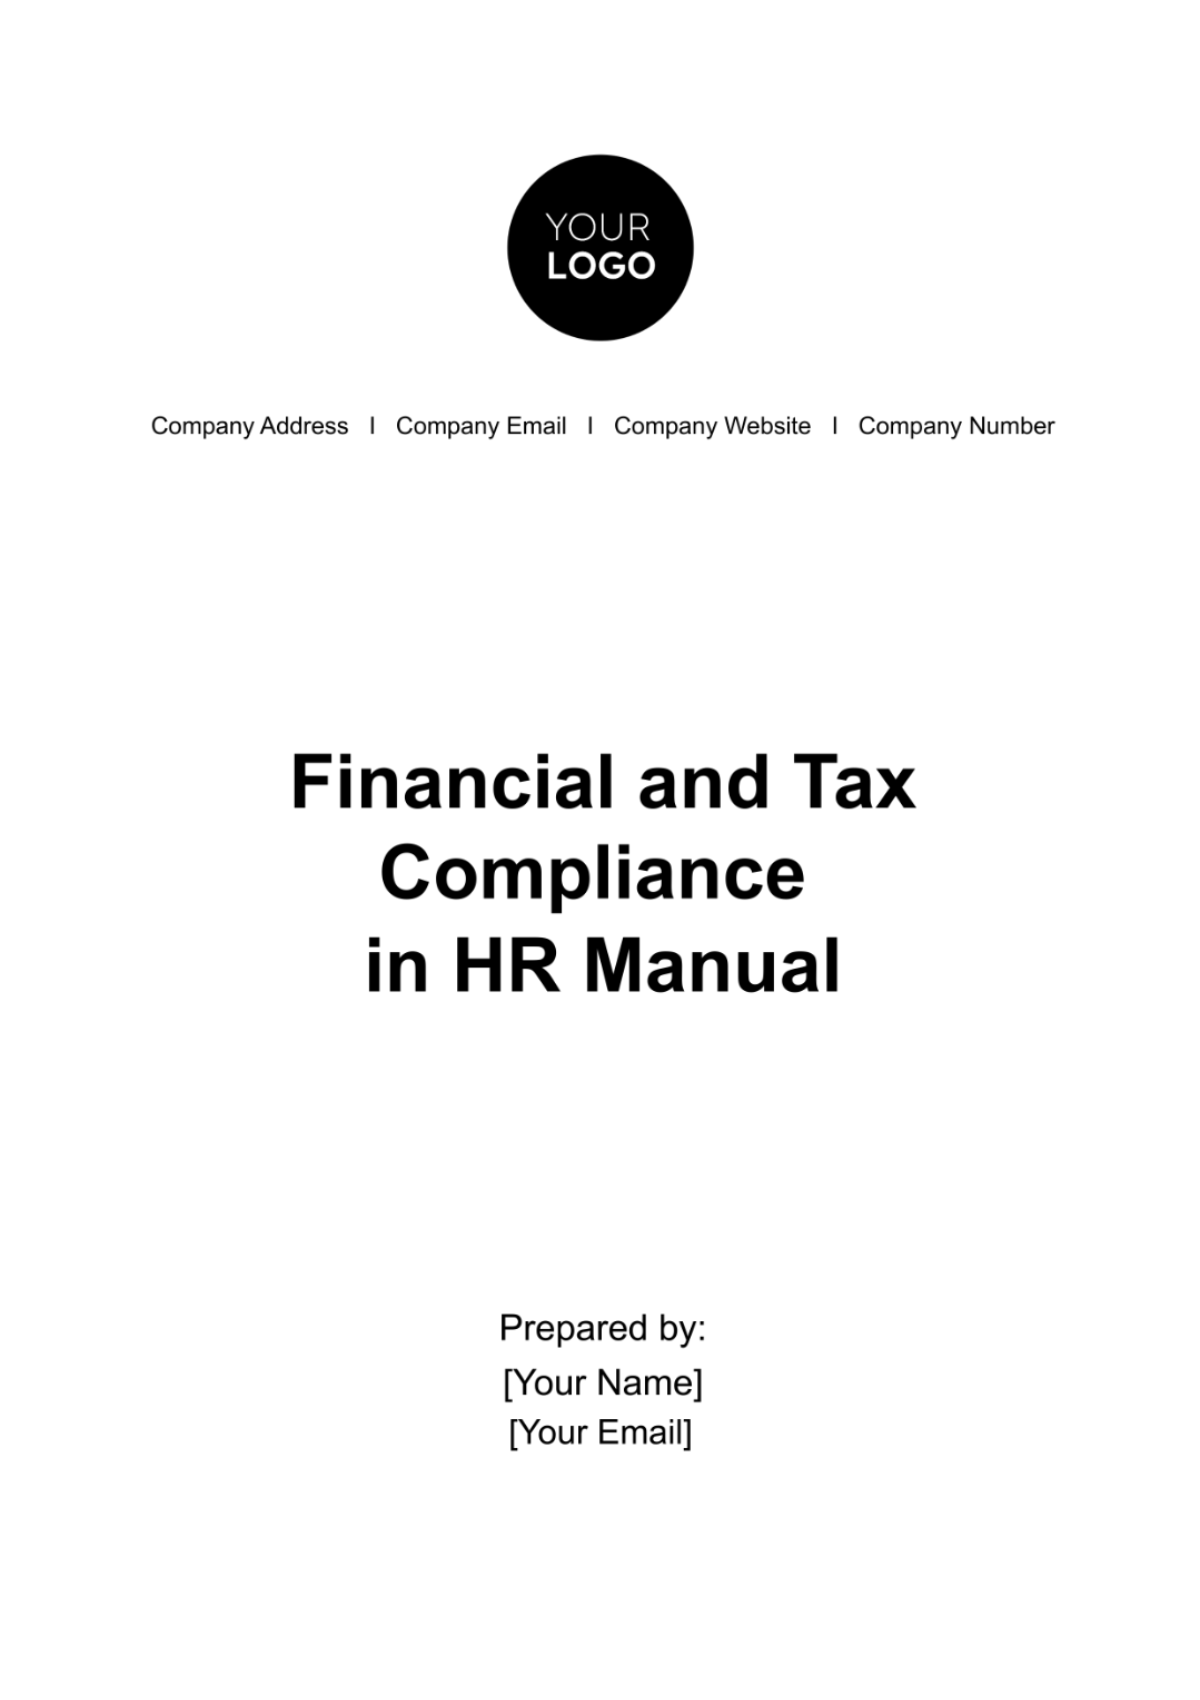 Free Financial and Tax Compliance in HR Manual Template